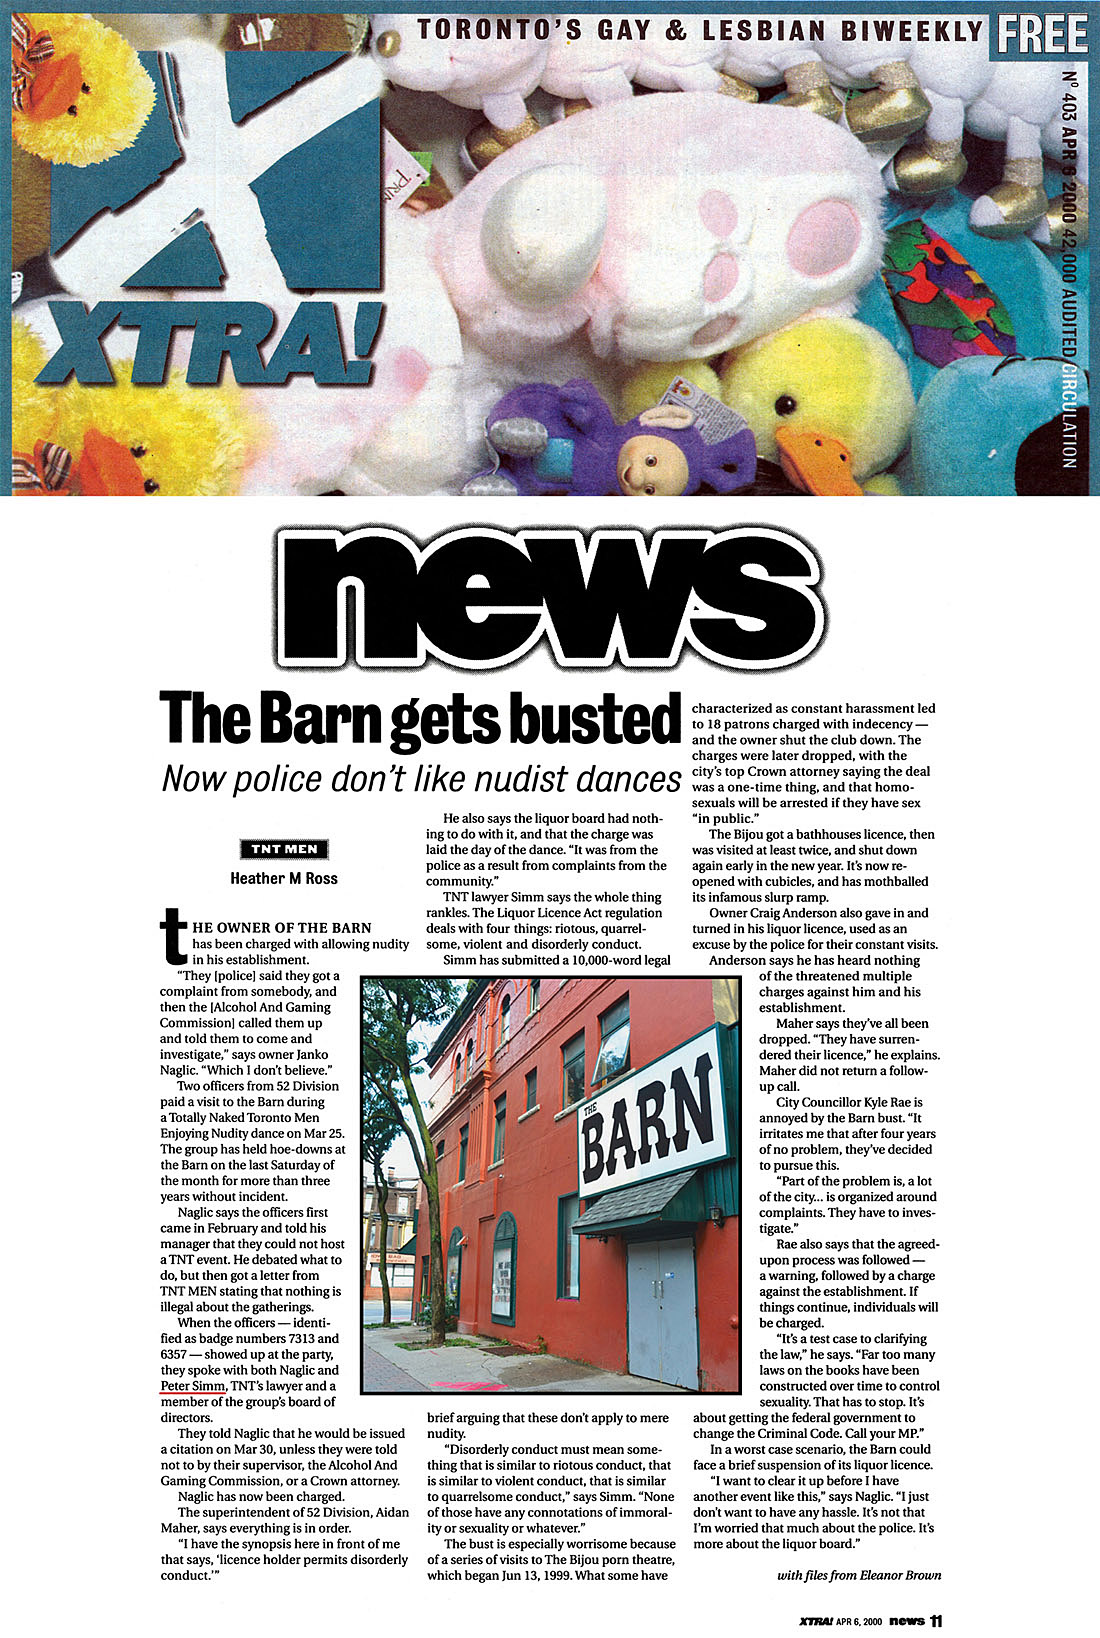 Xtra [Toronto] 2000-04-06 - Barn charged with “permitting disorderly conduct”